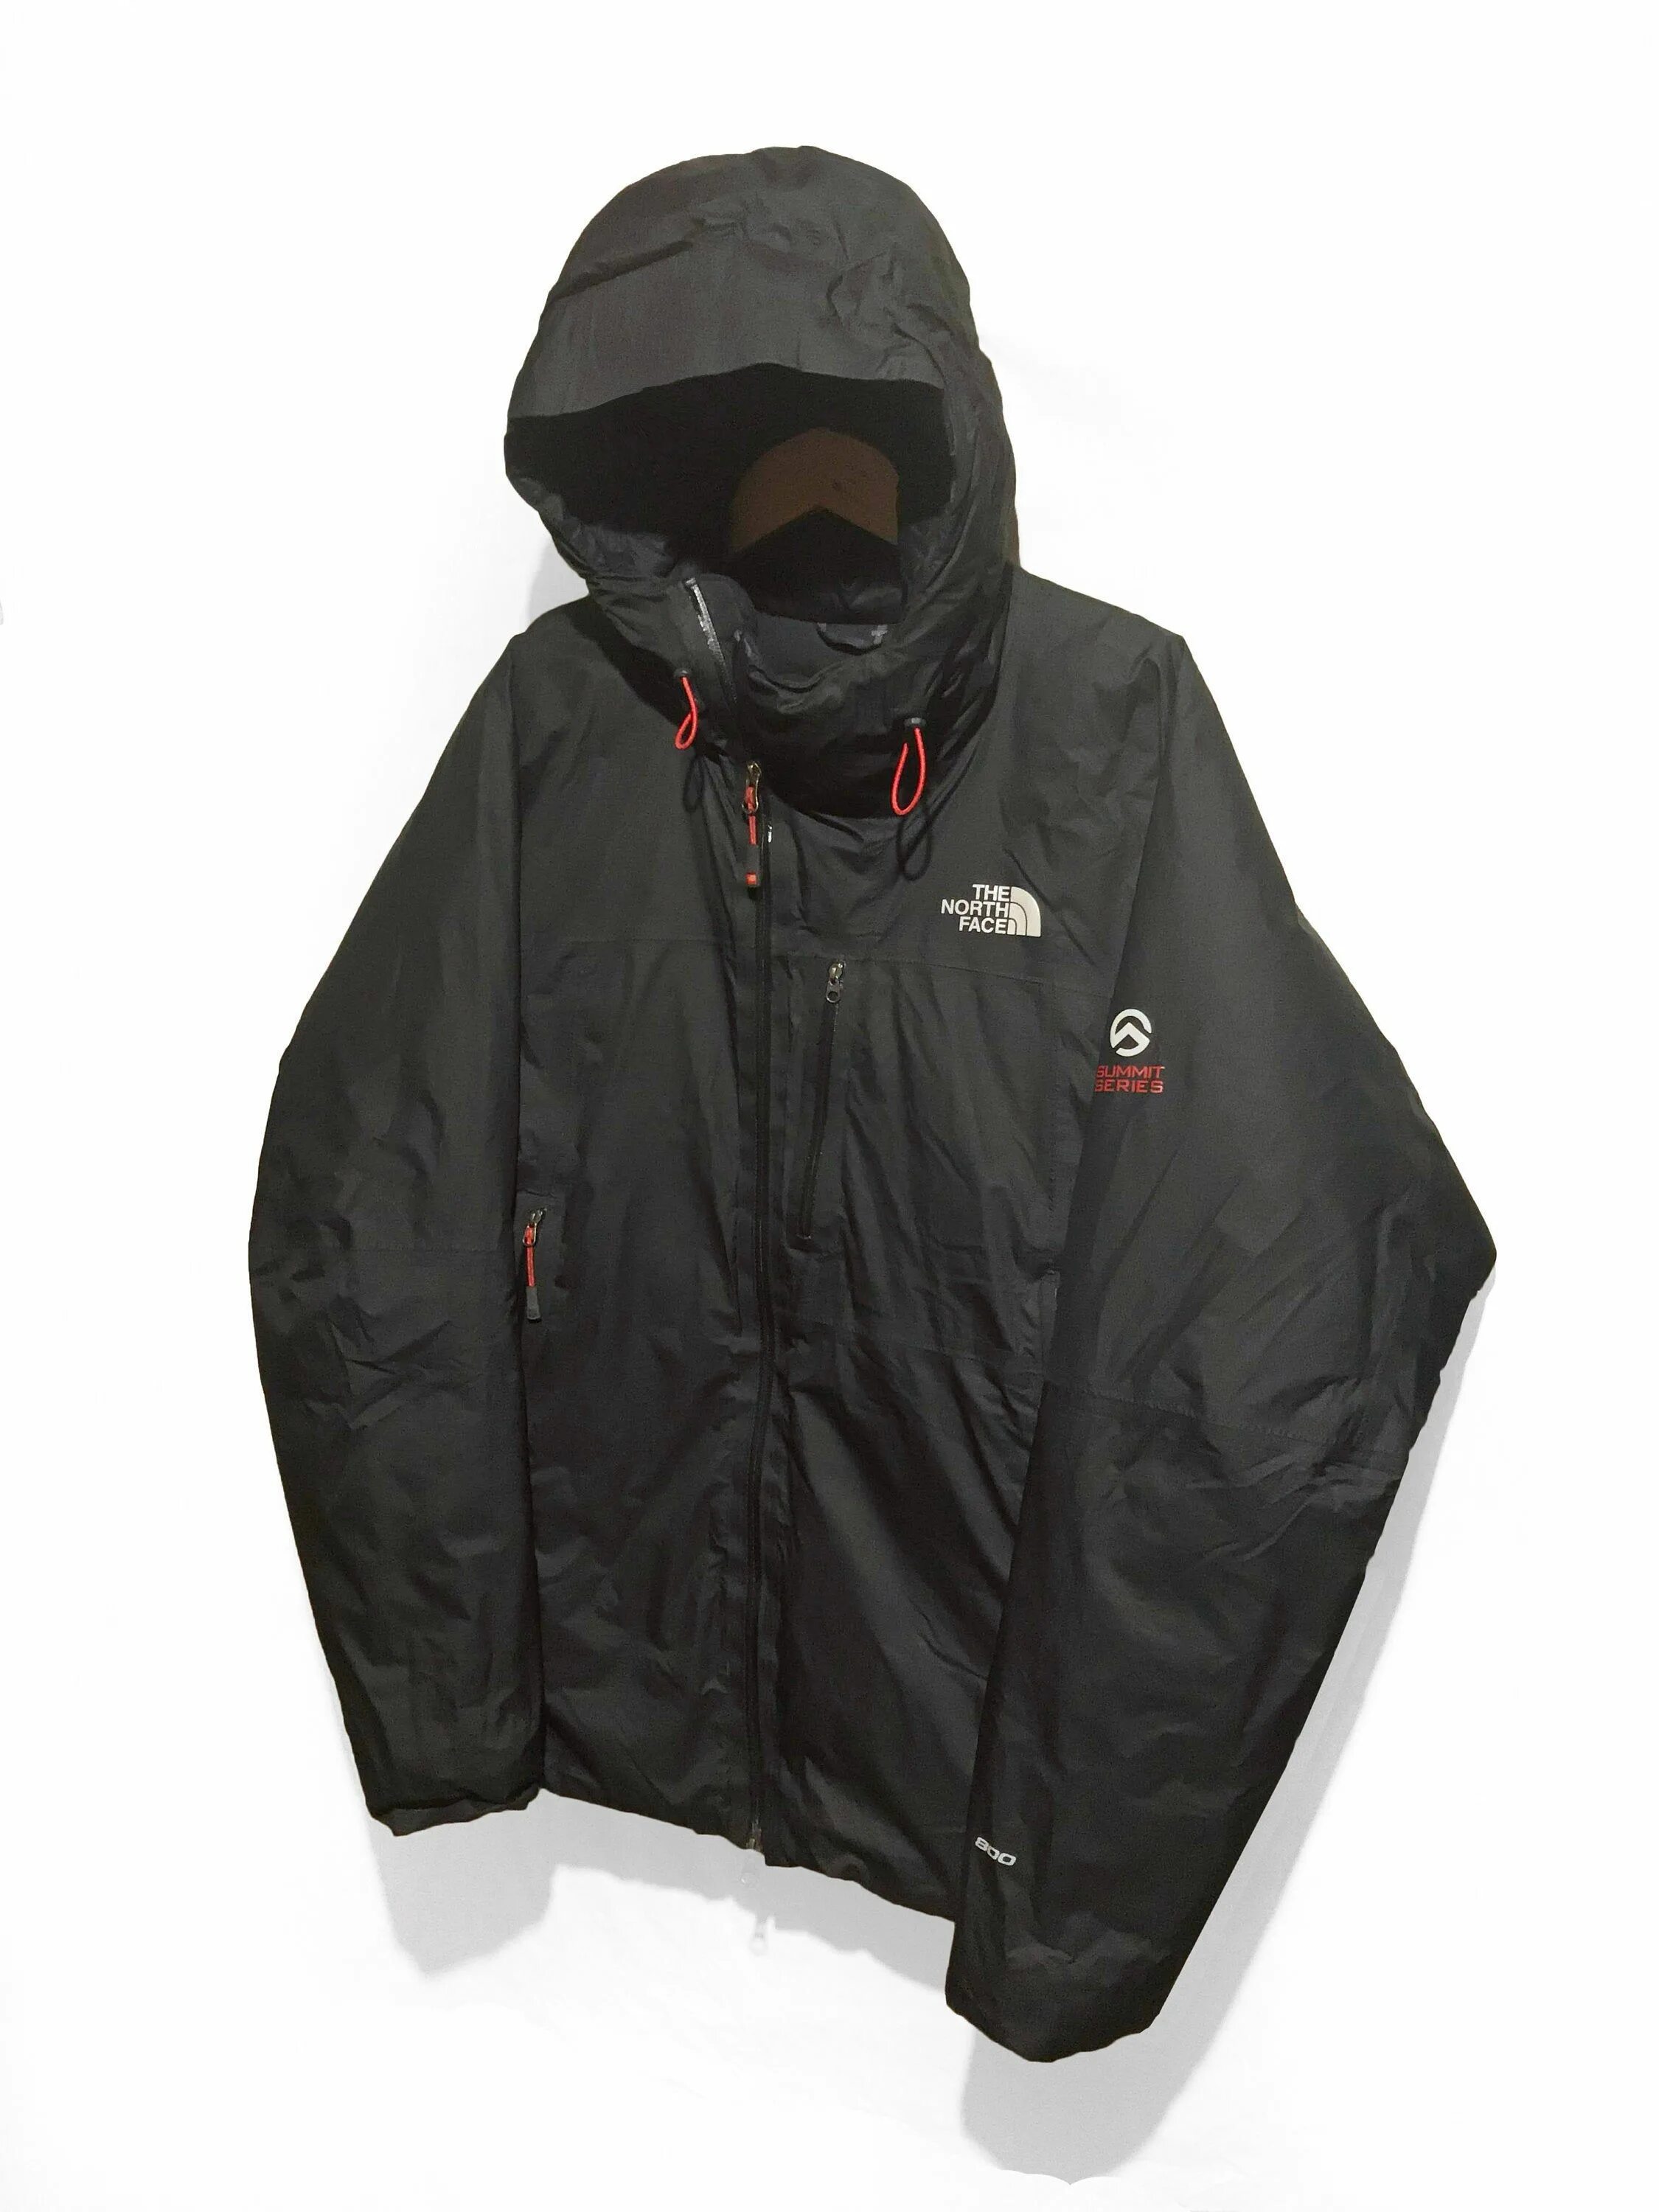 The north face summit series. The North face Summit Series 800. TNF 800 HYVENT. TNF 800 Summit Series. The North face Summit Series 700.